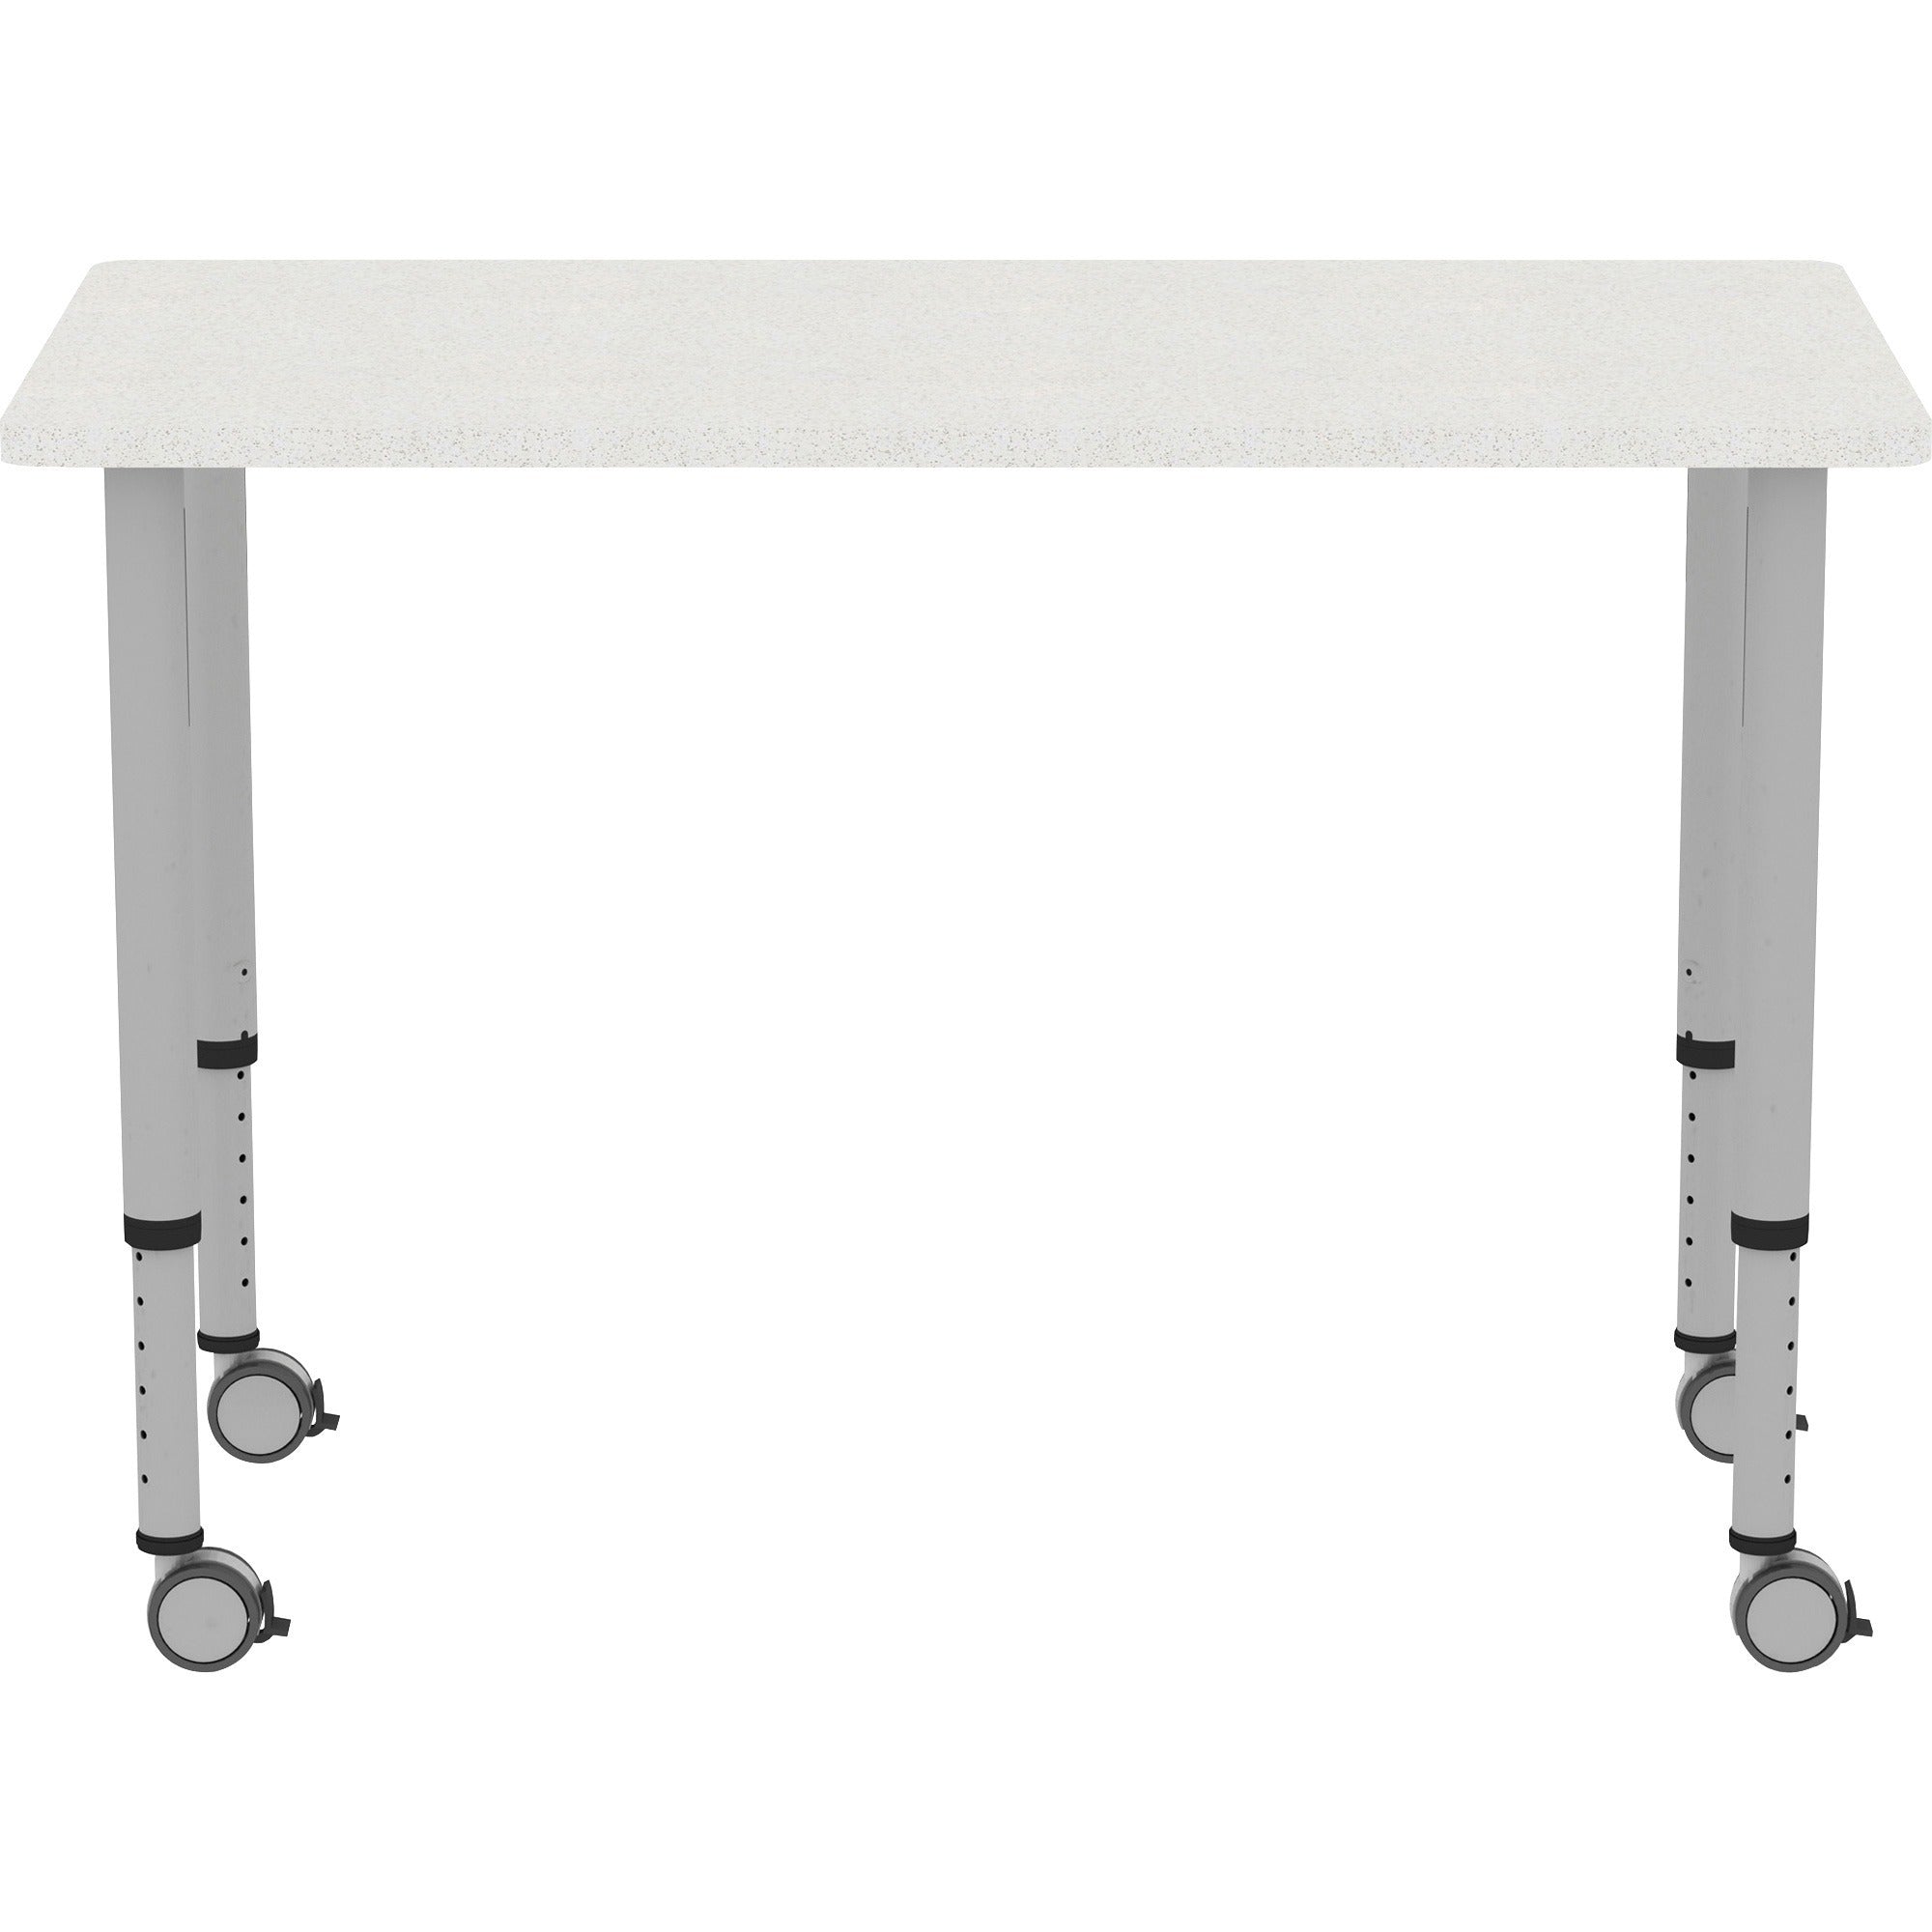 lorell-attune-height-adjustable-multipurpose-rectangular-table-for-table-toprectangle-top-adjustable-height-2662-to-3362-adjustment-x-48-table-top-width-x-2362-table-top-depth-3362-height-assembly-required-laminated-gray-lam_llr69581 - 3